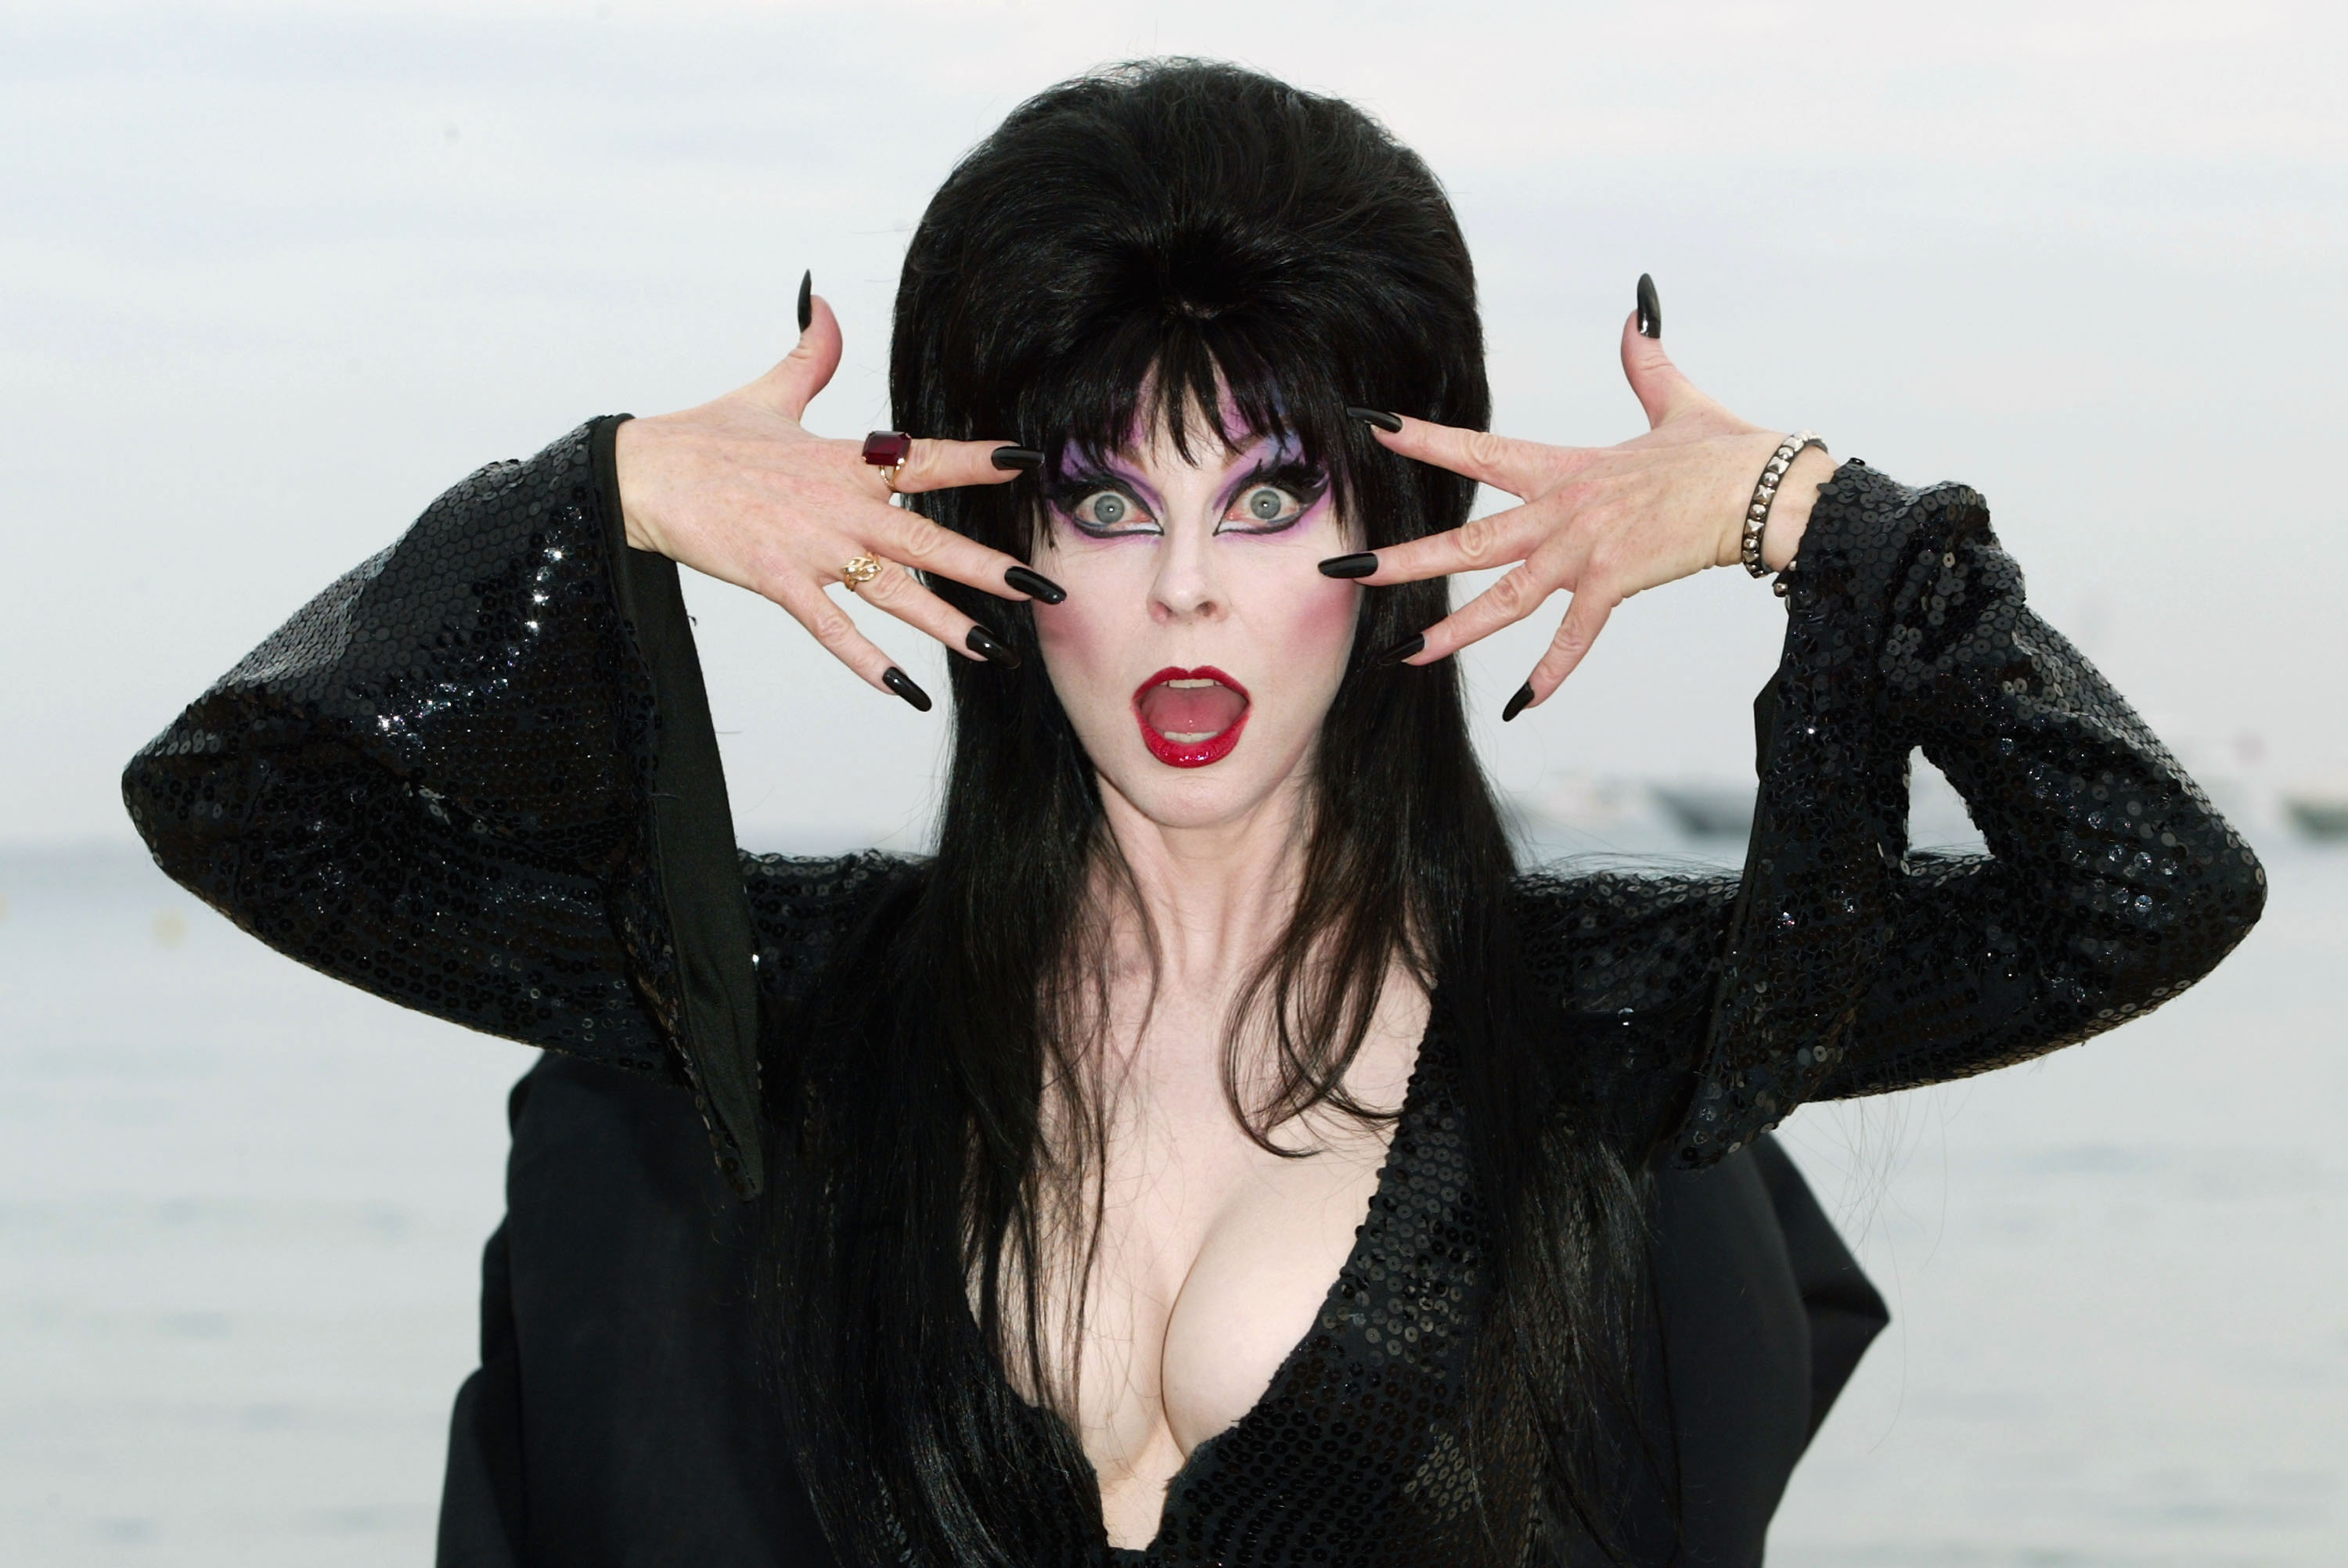 alli braun recommends Pictures Of Elvira Mistress Of The Dark